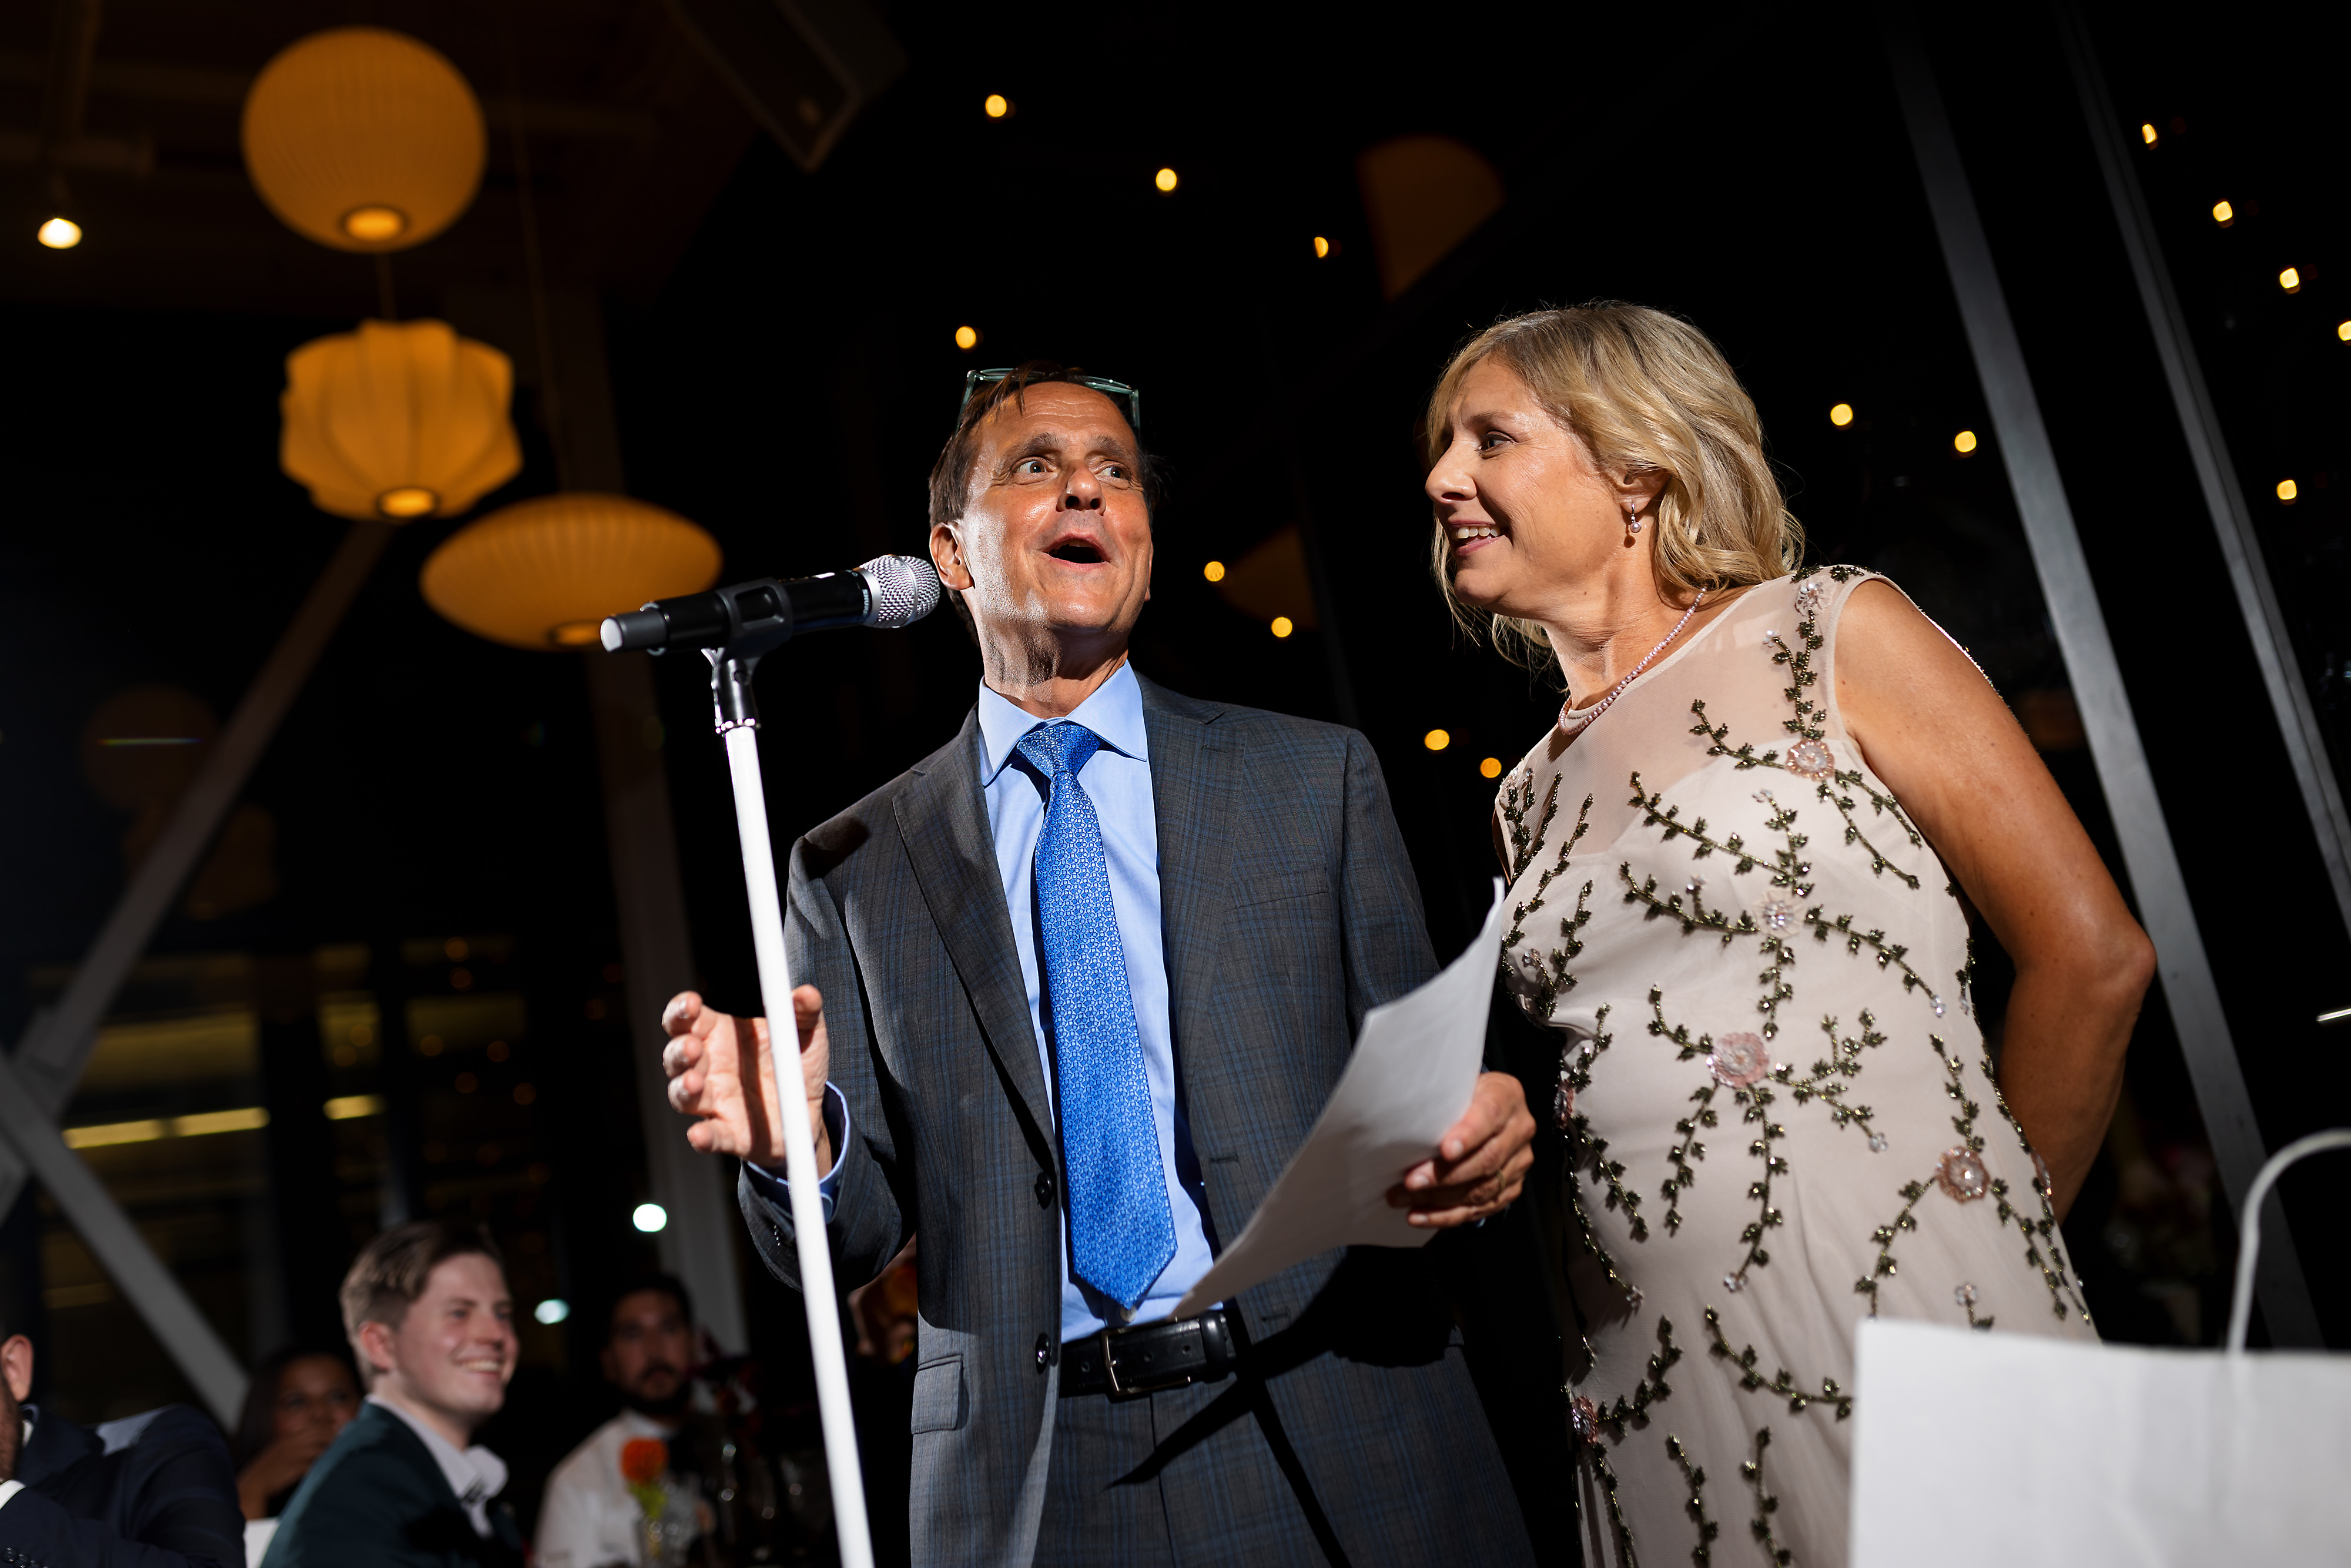 parents toast during wedding reception at Greenhouse Loft in Chicago